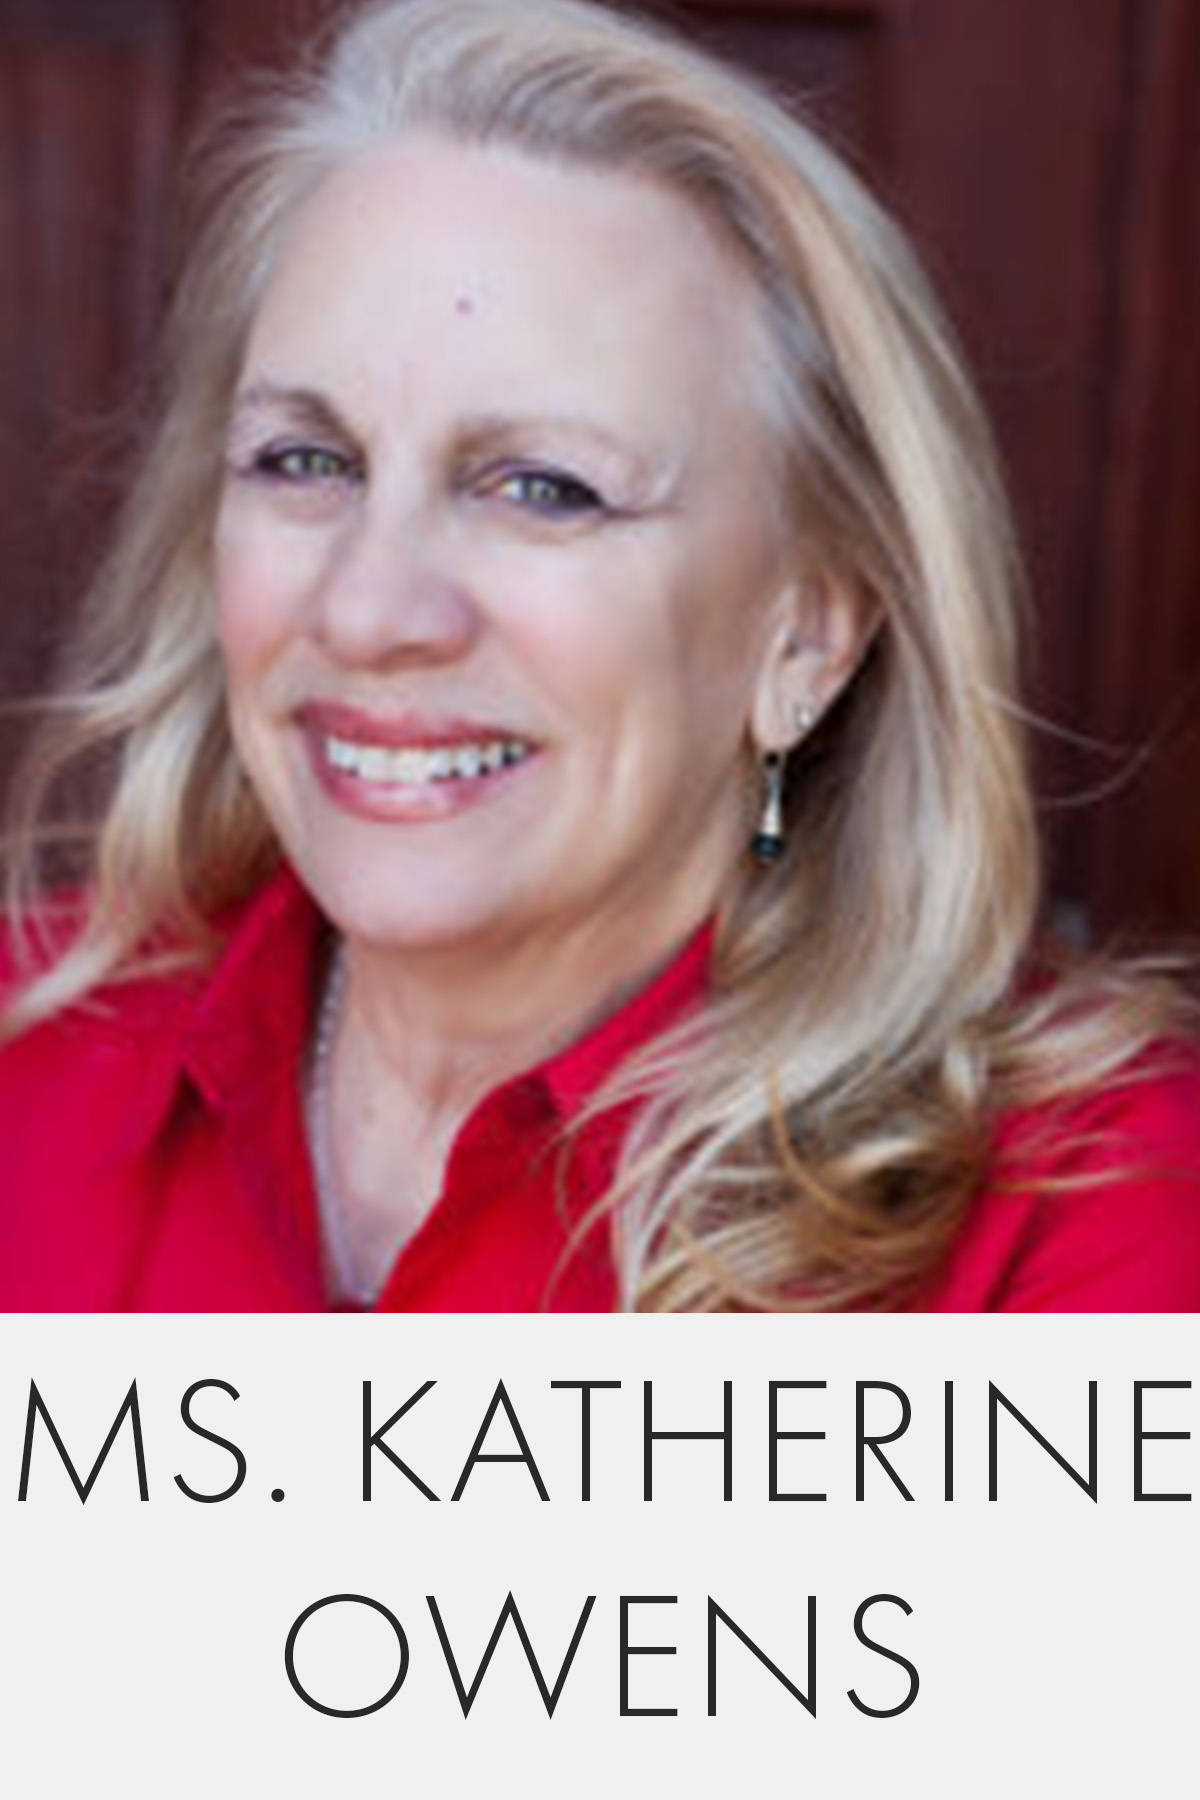 MS KATHERINE OWENS The Dallas Institute Of Humanities And Culture